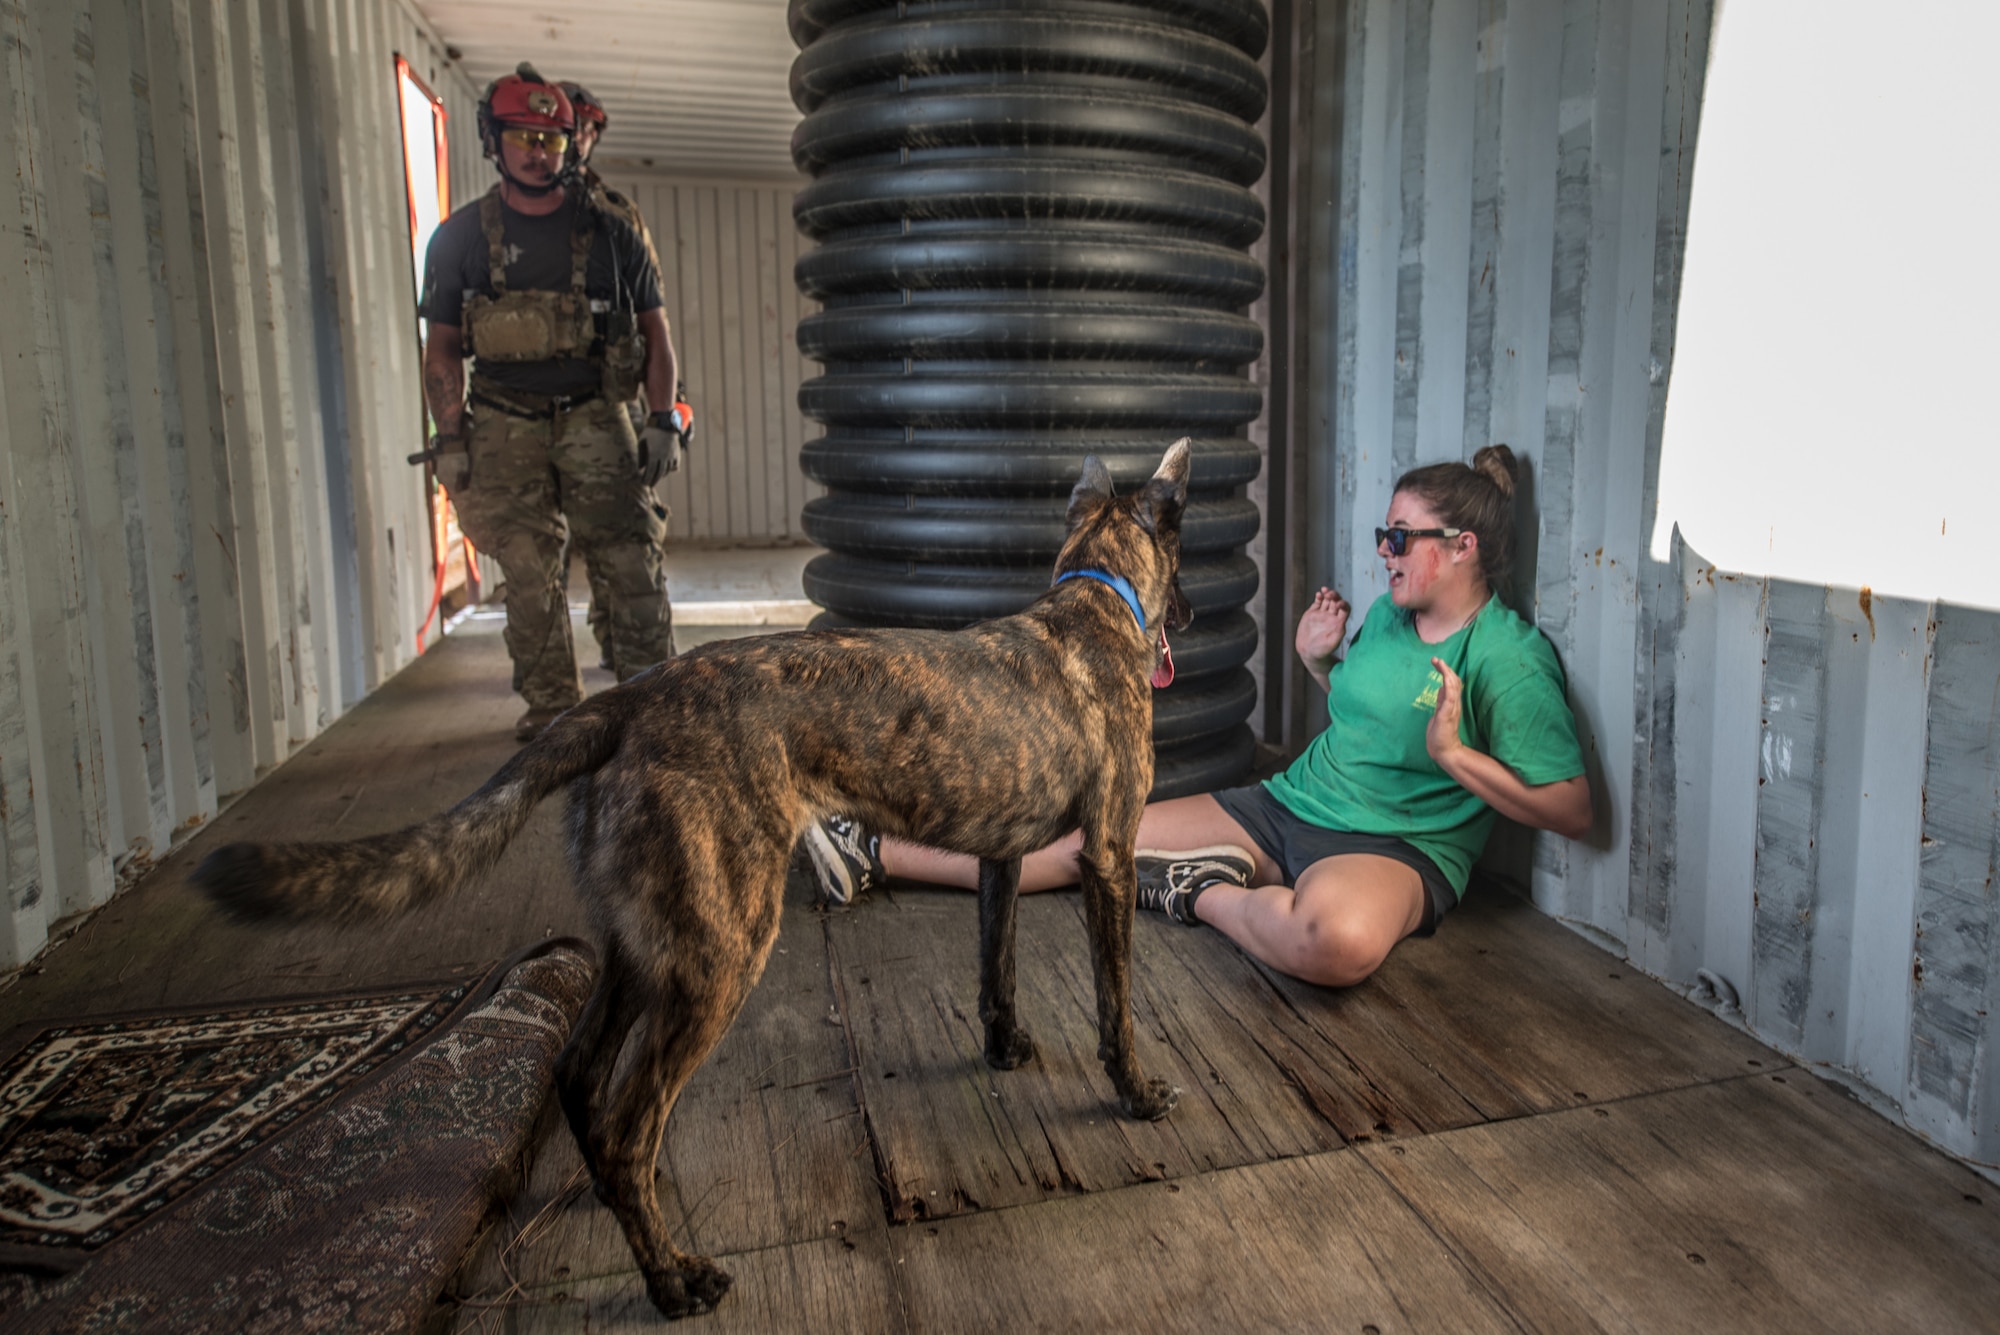 Callie, a search and rescue dog for the Kentucky Air National Guard’s 123rd Special Tactics Squadron, alerts Master Sgt. Rudy Parsons, her handler, after locating a simulated casualty July 17, 2019, during Patriot North, an annual domestic operations exercise designed to provide natural disaster-response training at Volk Field, Wis. Callie is currently the only search and rescue dog in the Department of Defense. (U.S. Air National Guard photo by Staff Sgt. Joshua Horton)